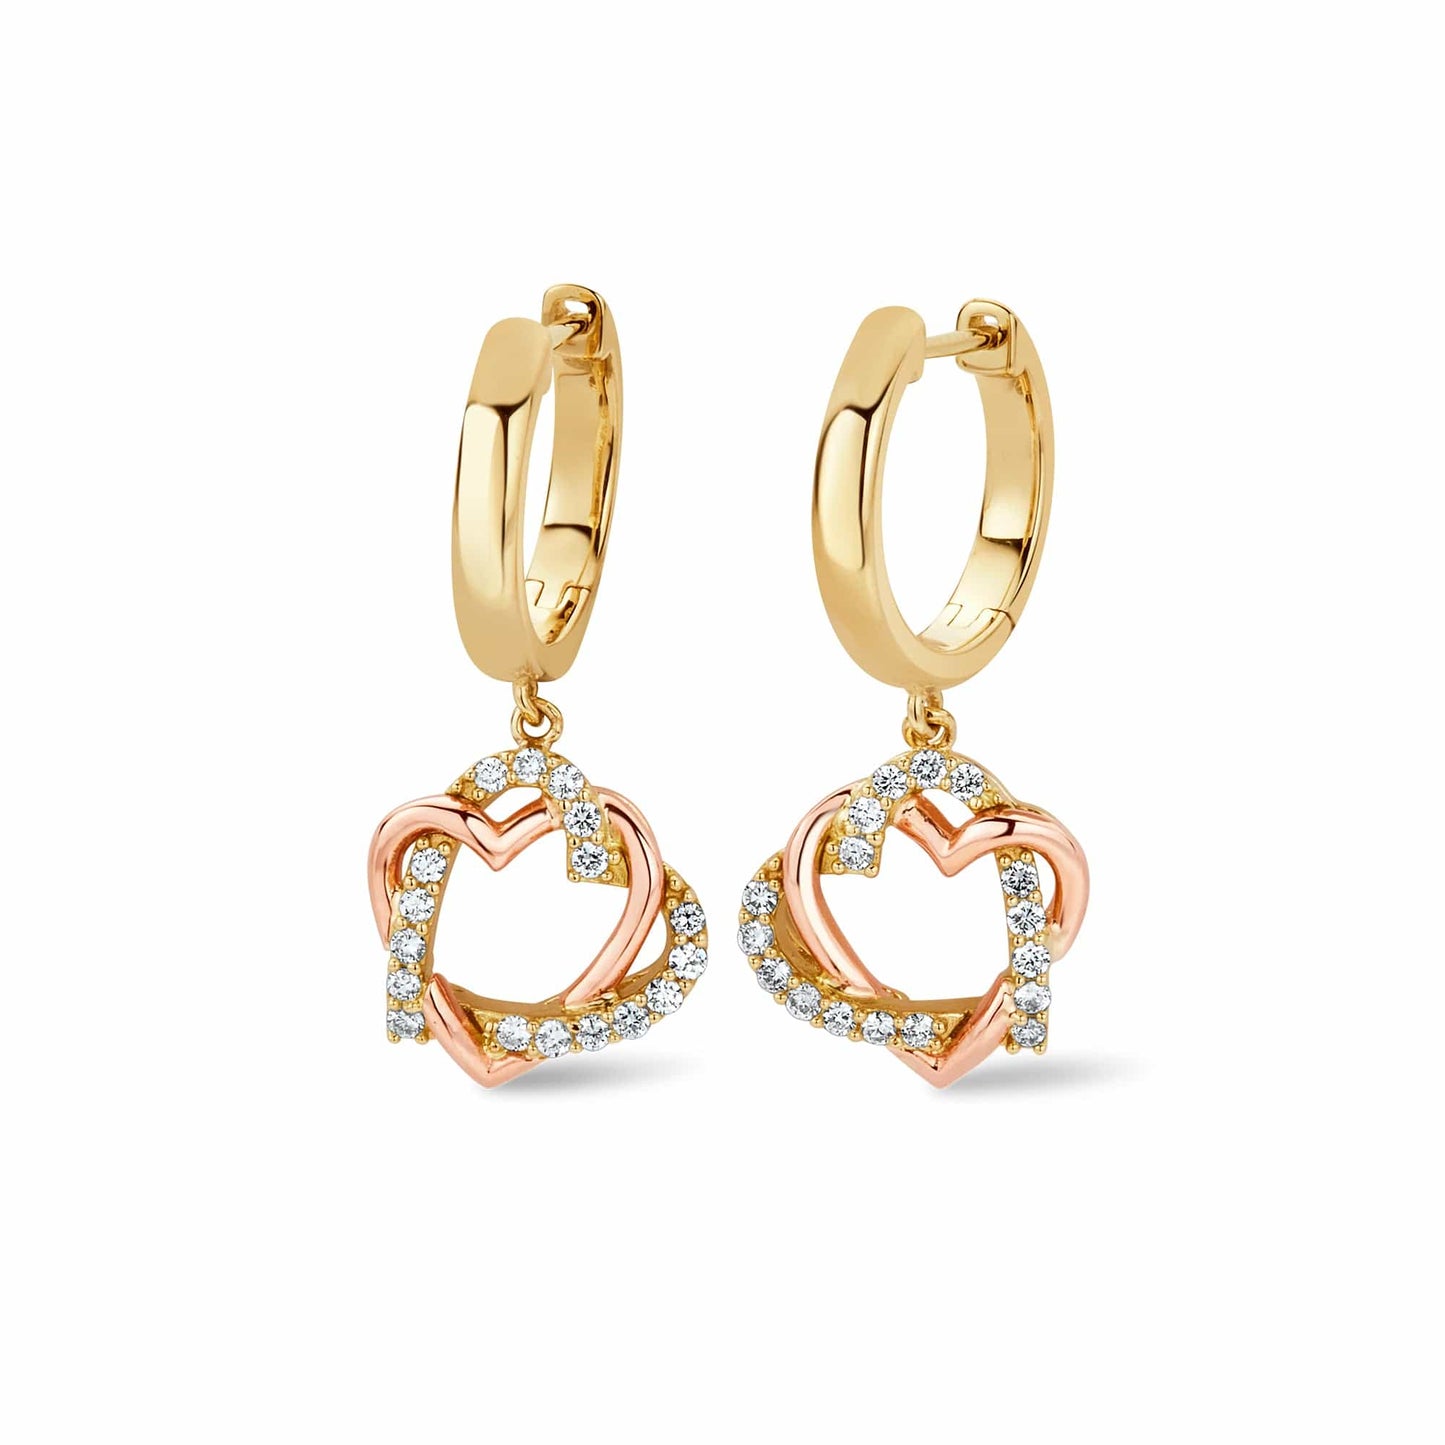 Always in My Heart 18ct Gold and Diamond Drop Earrings